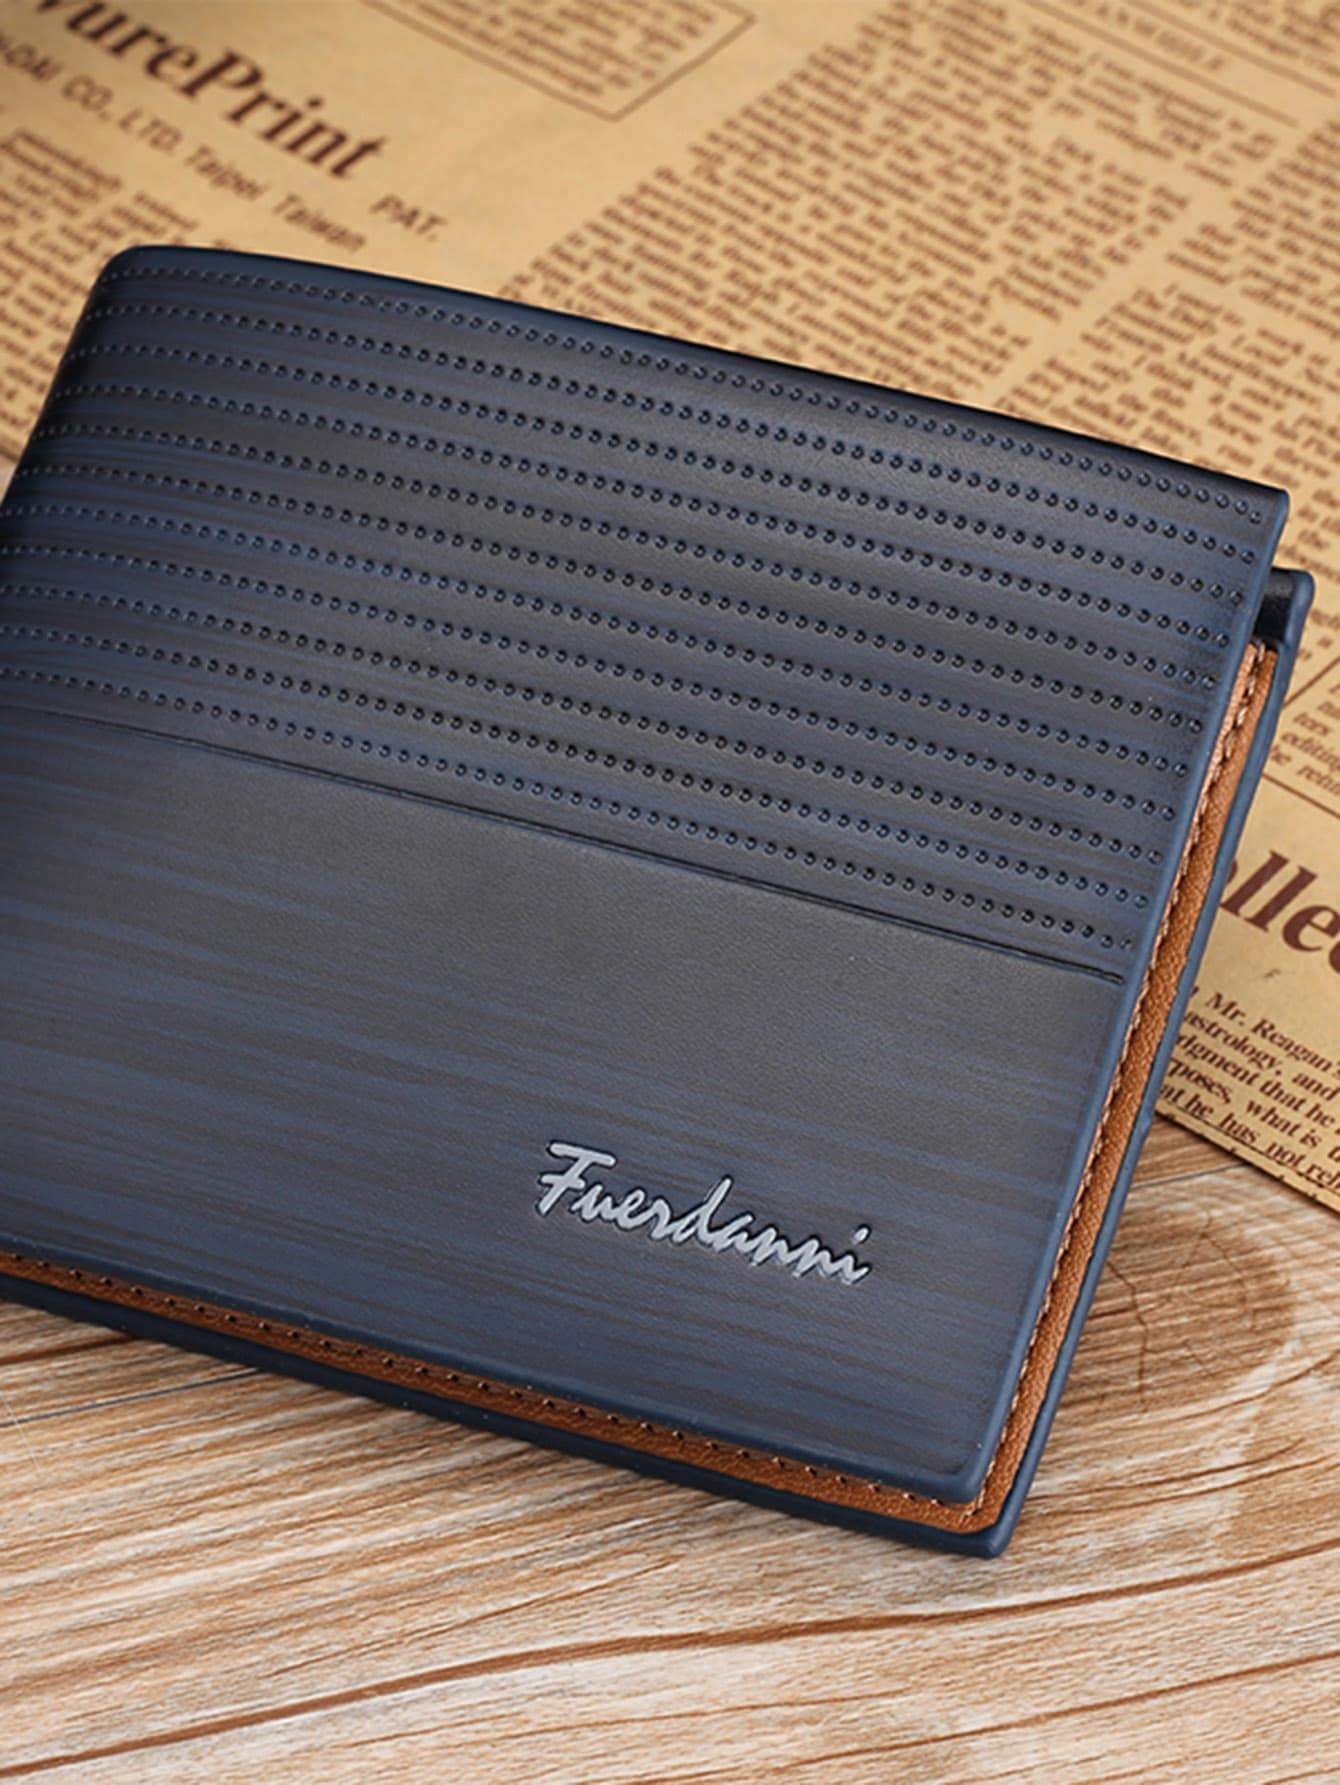 PU Leather Navy Fold Over Wallet